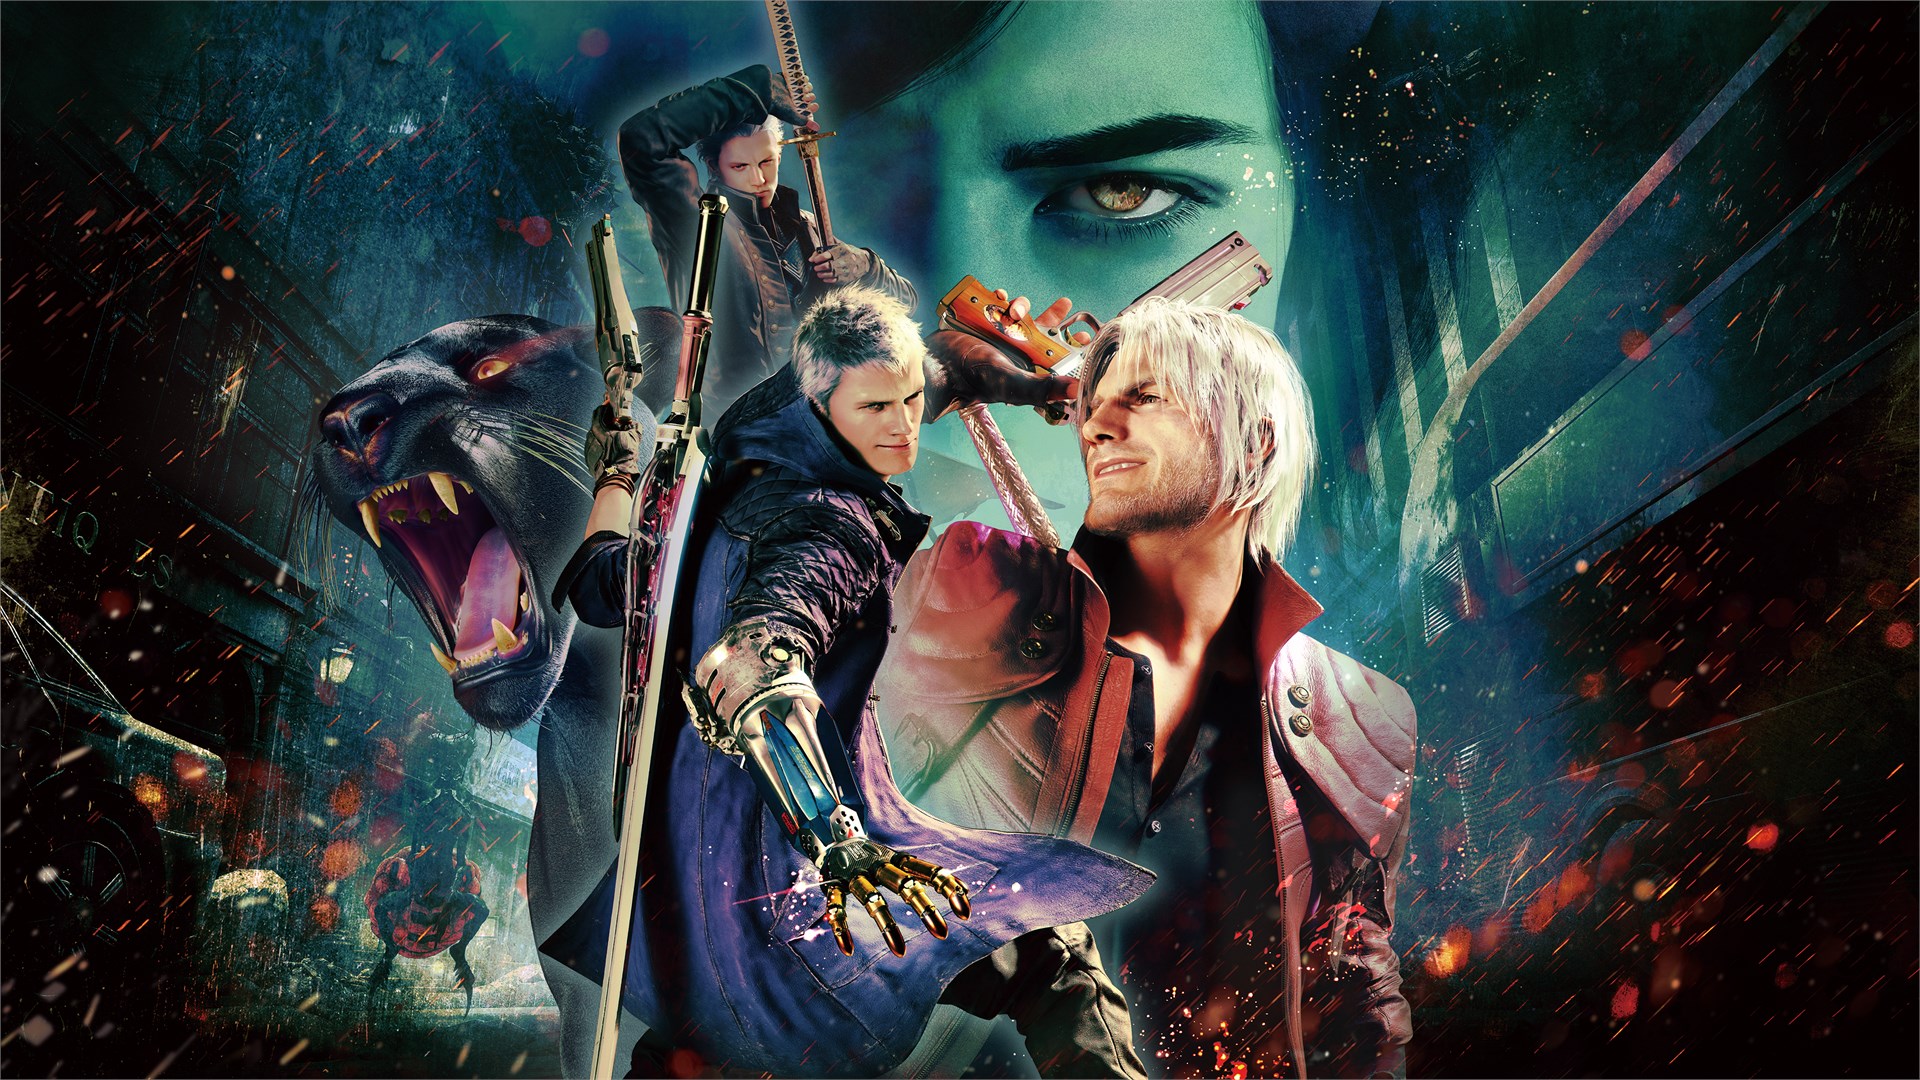 Devil May Cry 5 Special Edition Is Now Available For Xbox Series X|S